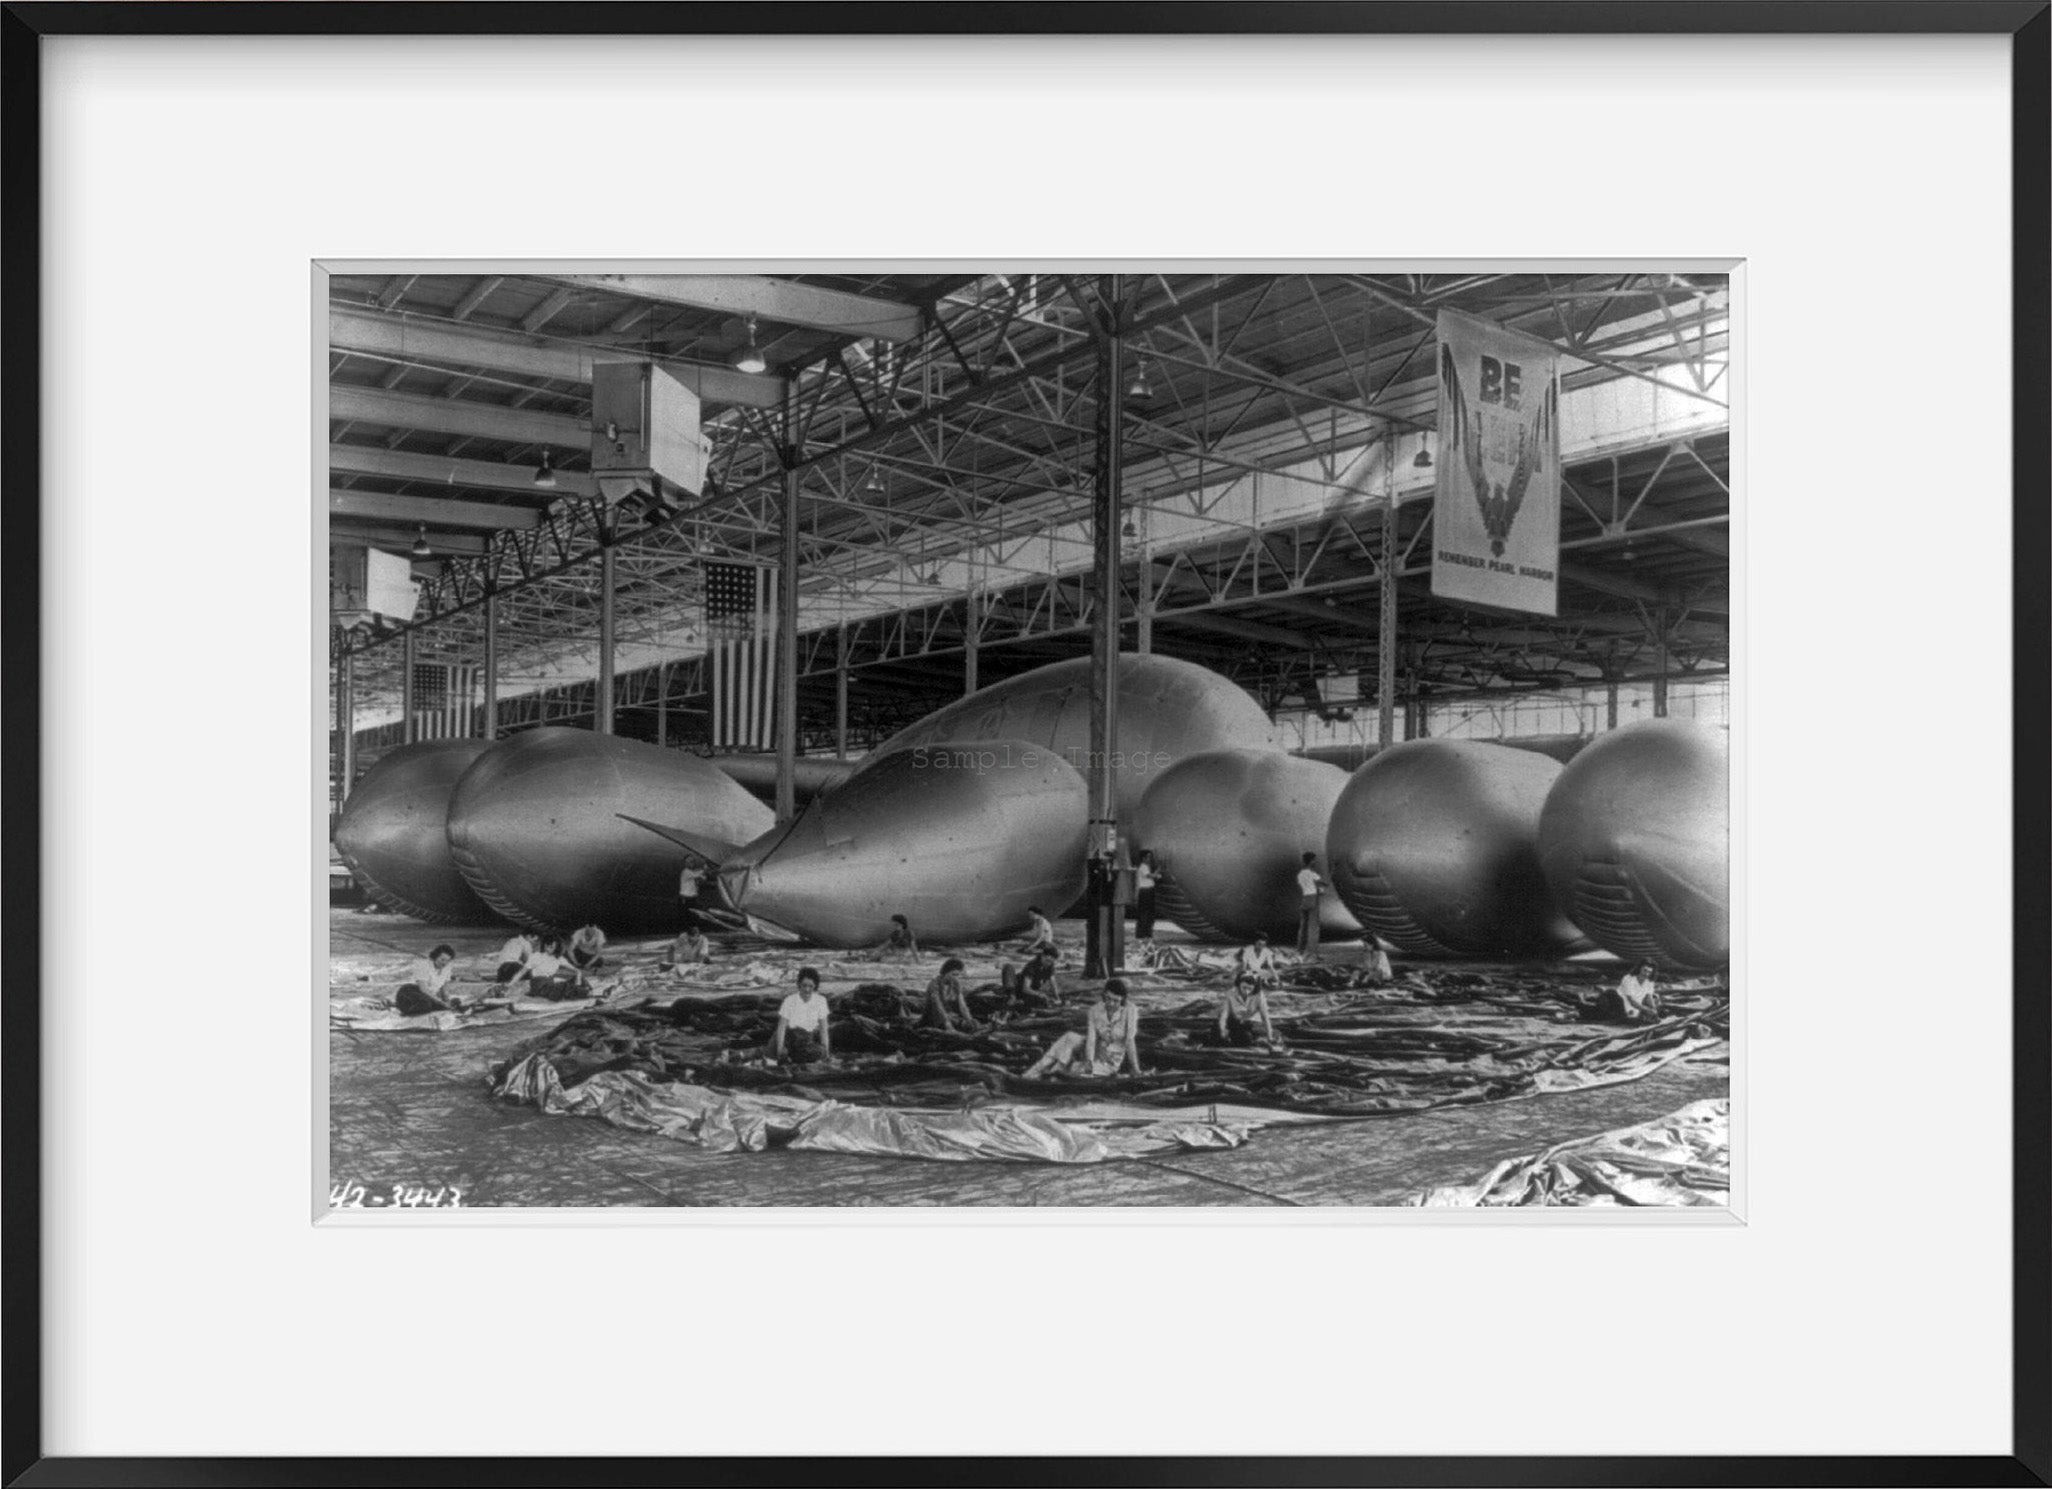 Photo: Barrage balloon seams being cemented, inspected by women war workers, c1942